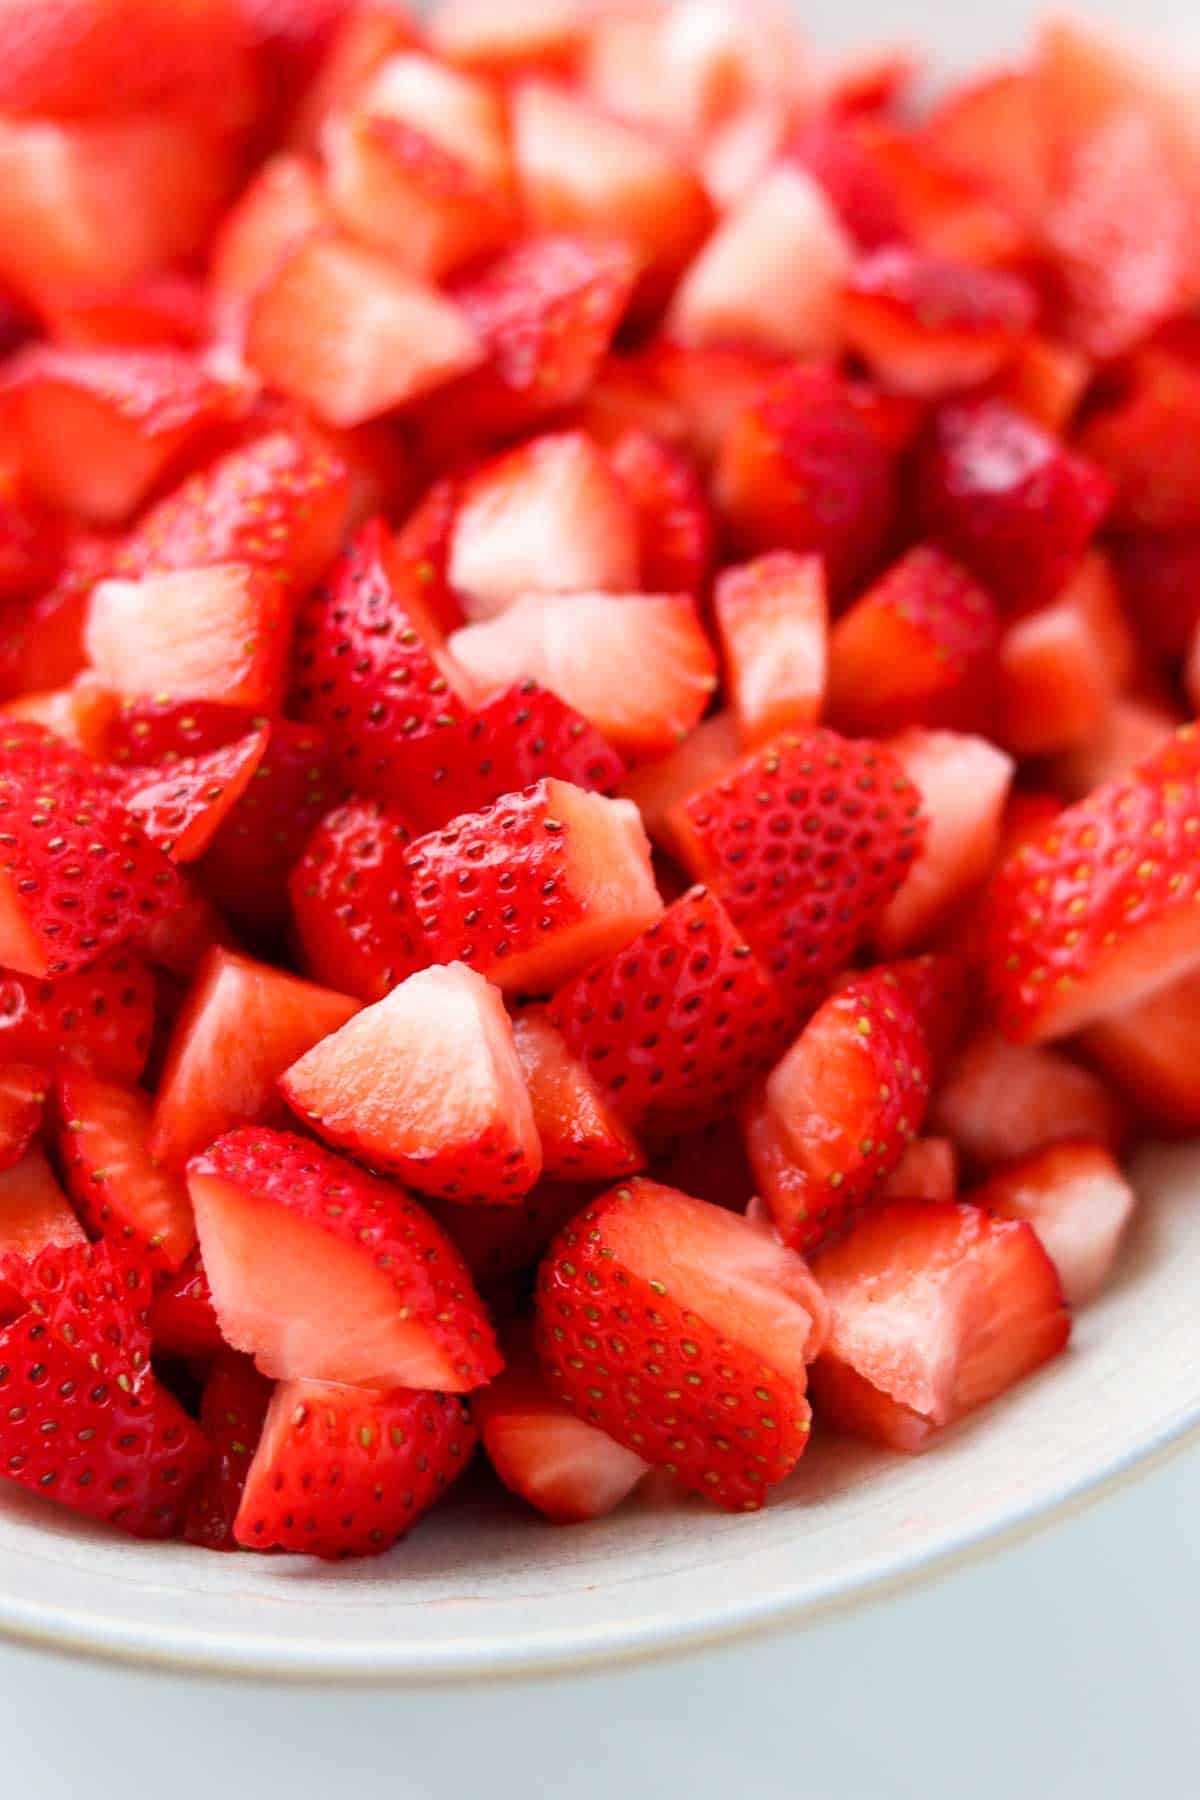 Close up of cut up strawberries.